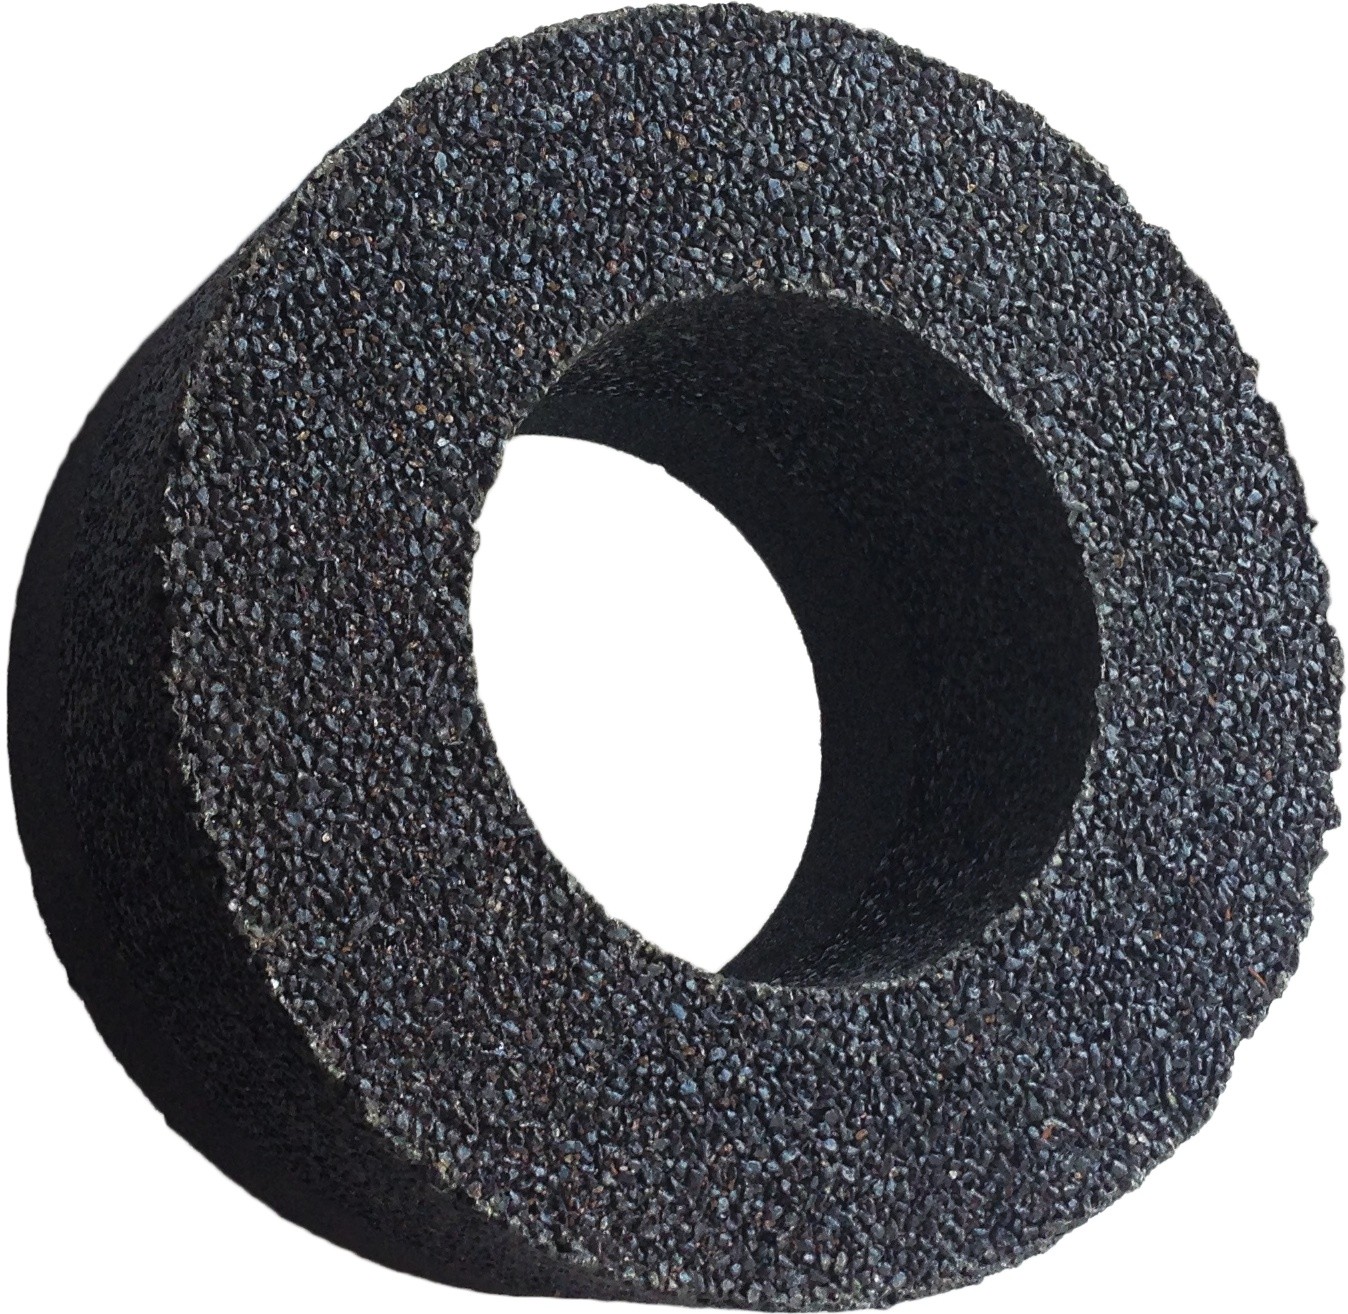 Replacement Geismar MP12 Grinding Stone